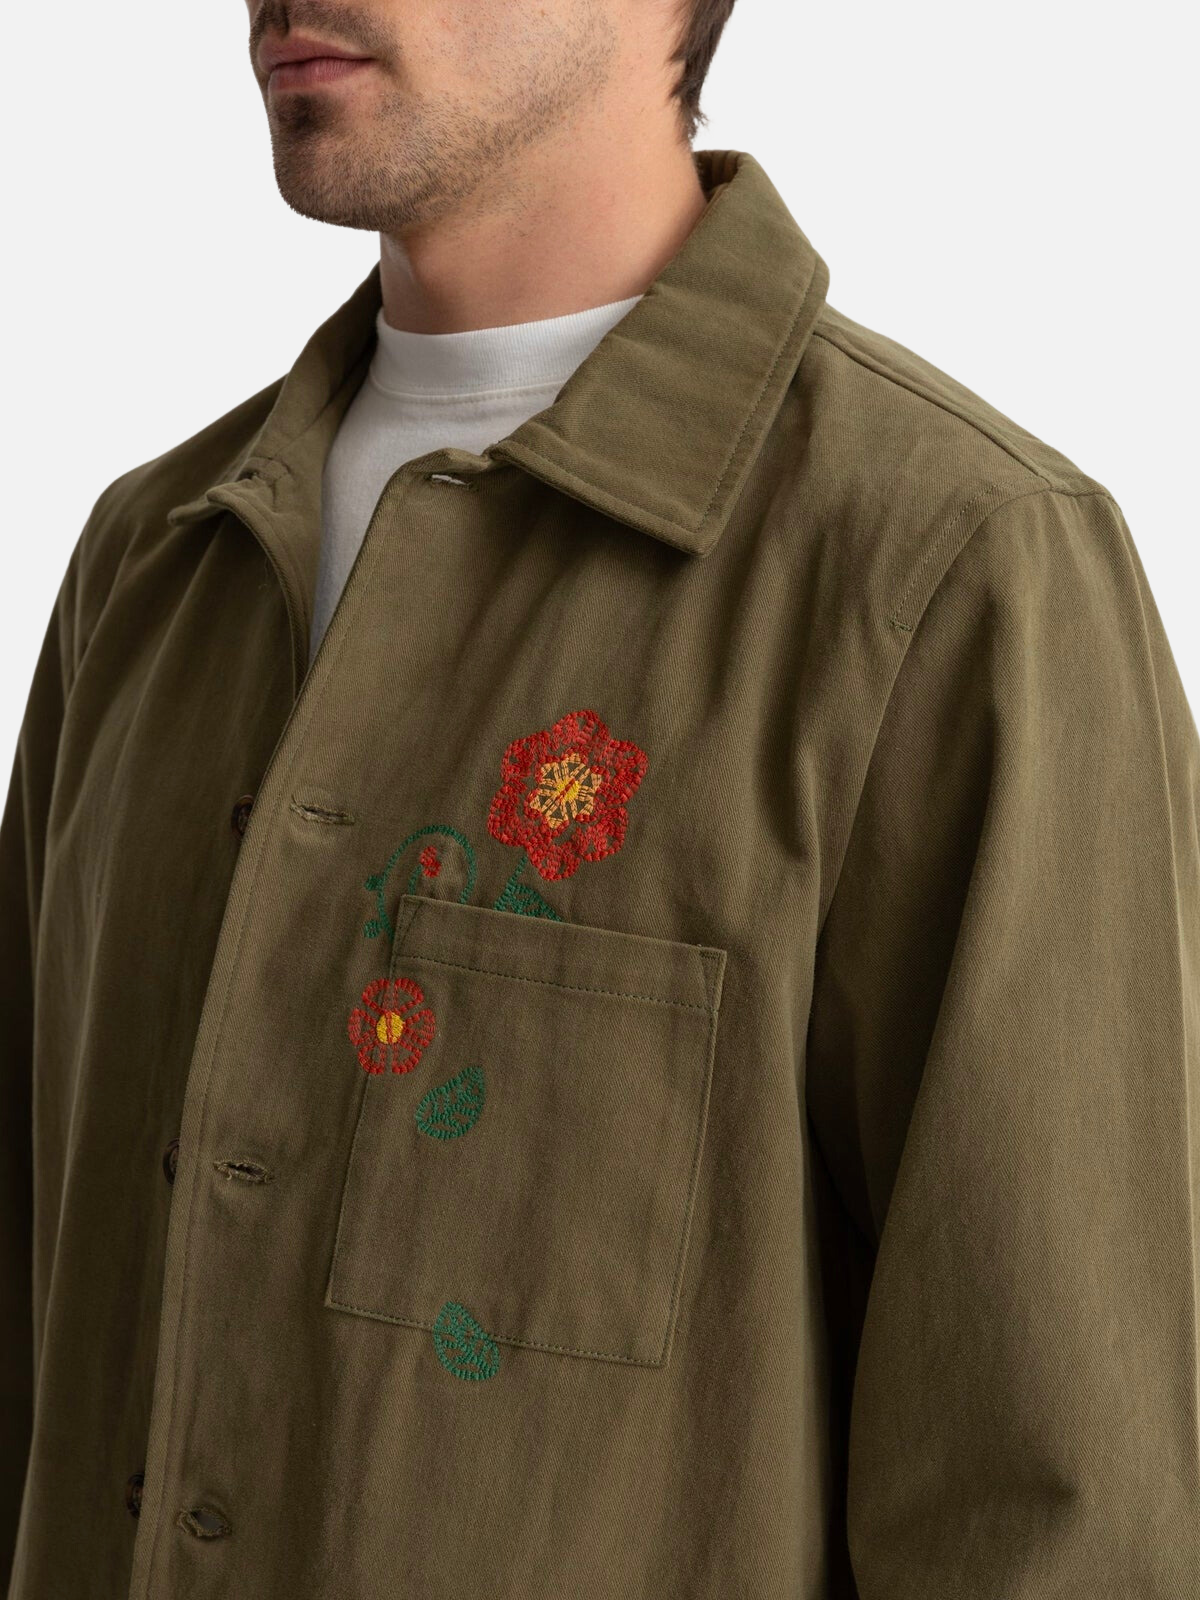 rhythm flower cpo overshirt olive floral embroidery stitching 100% cotton kempt athens ga georgia men's clothing store